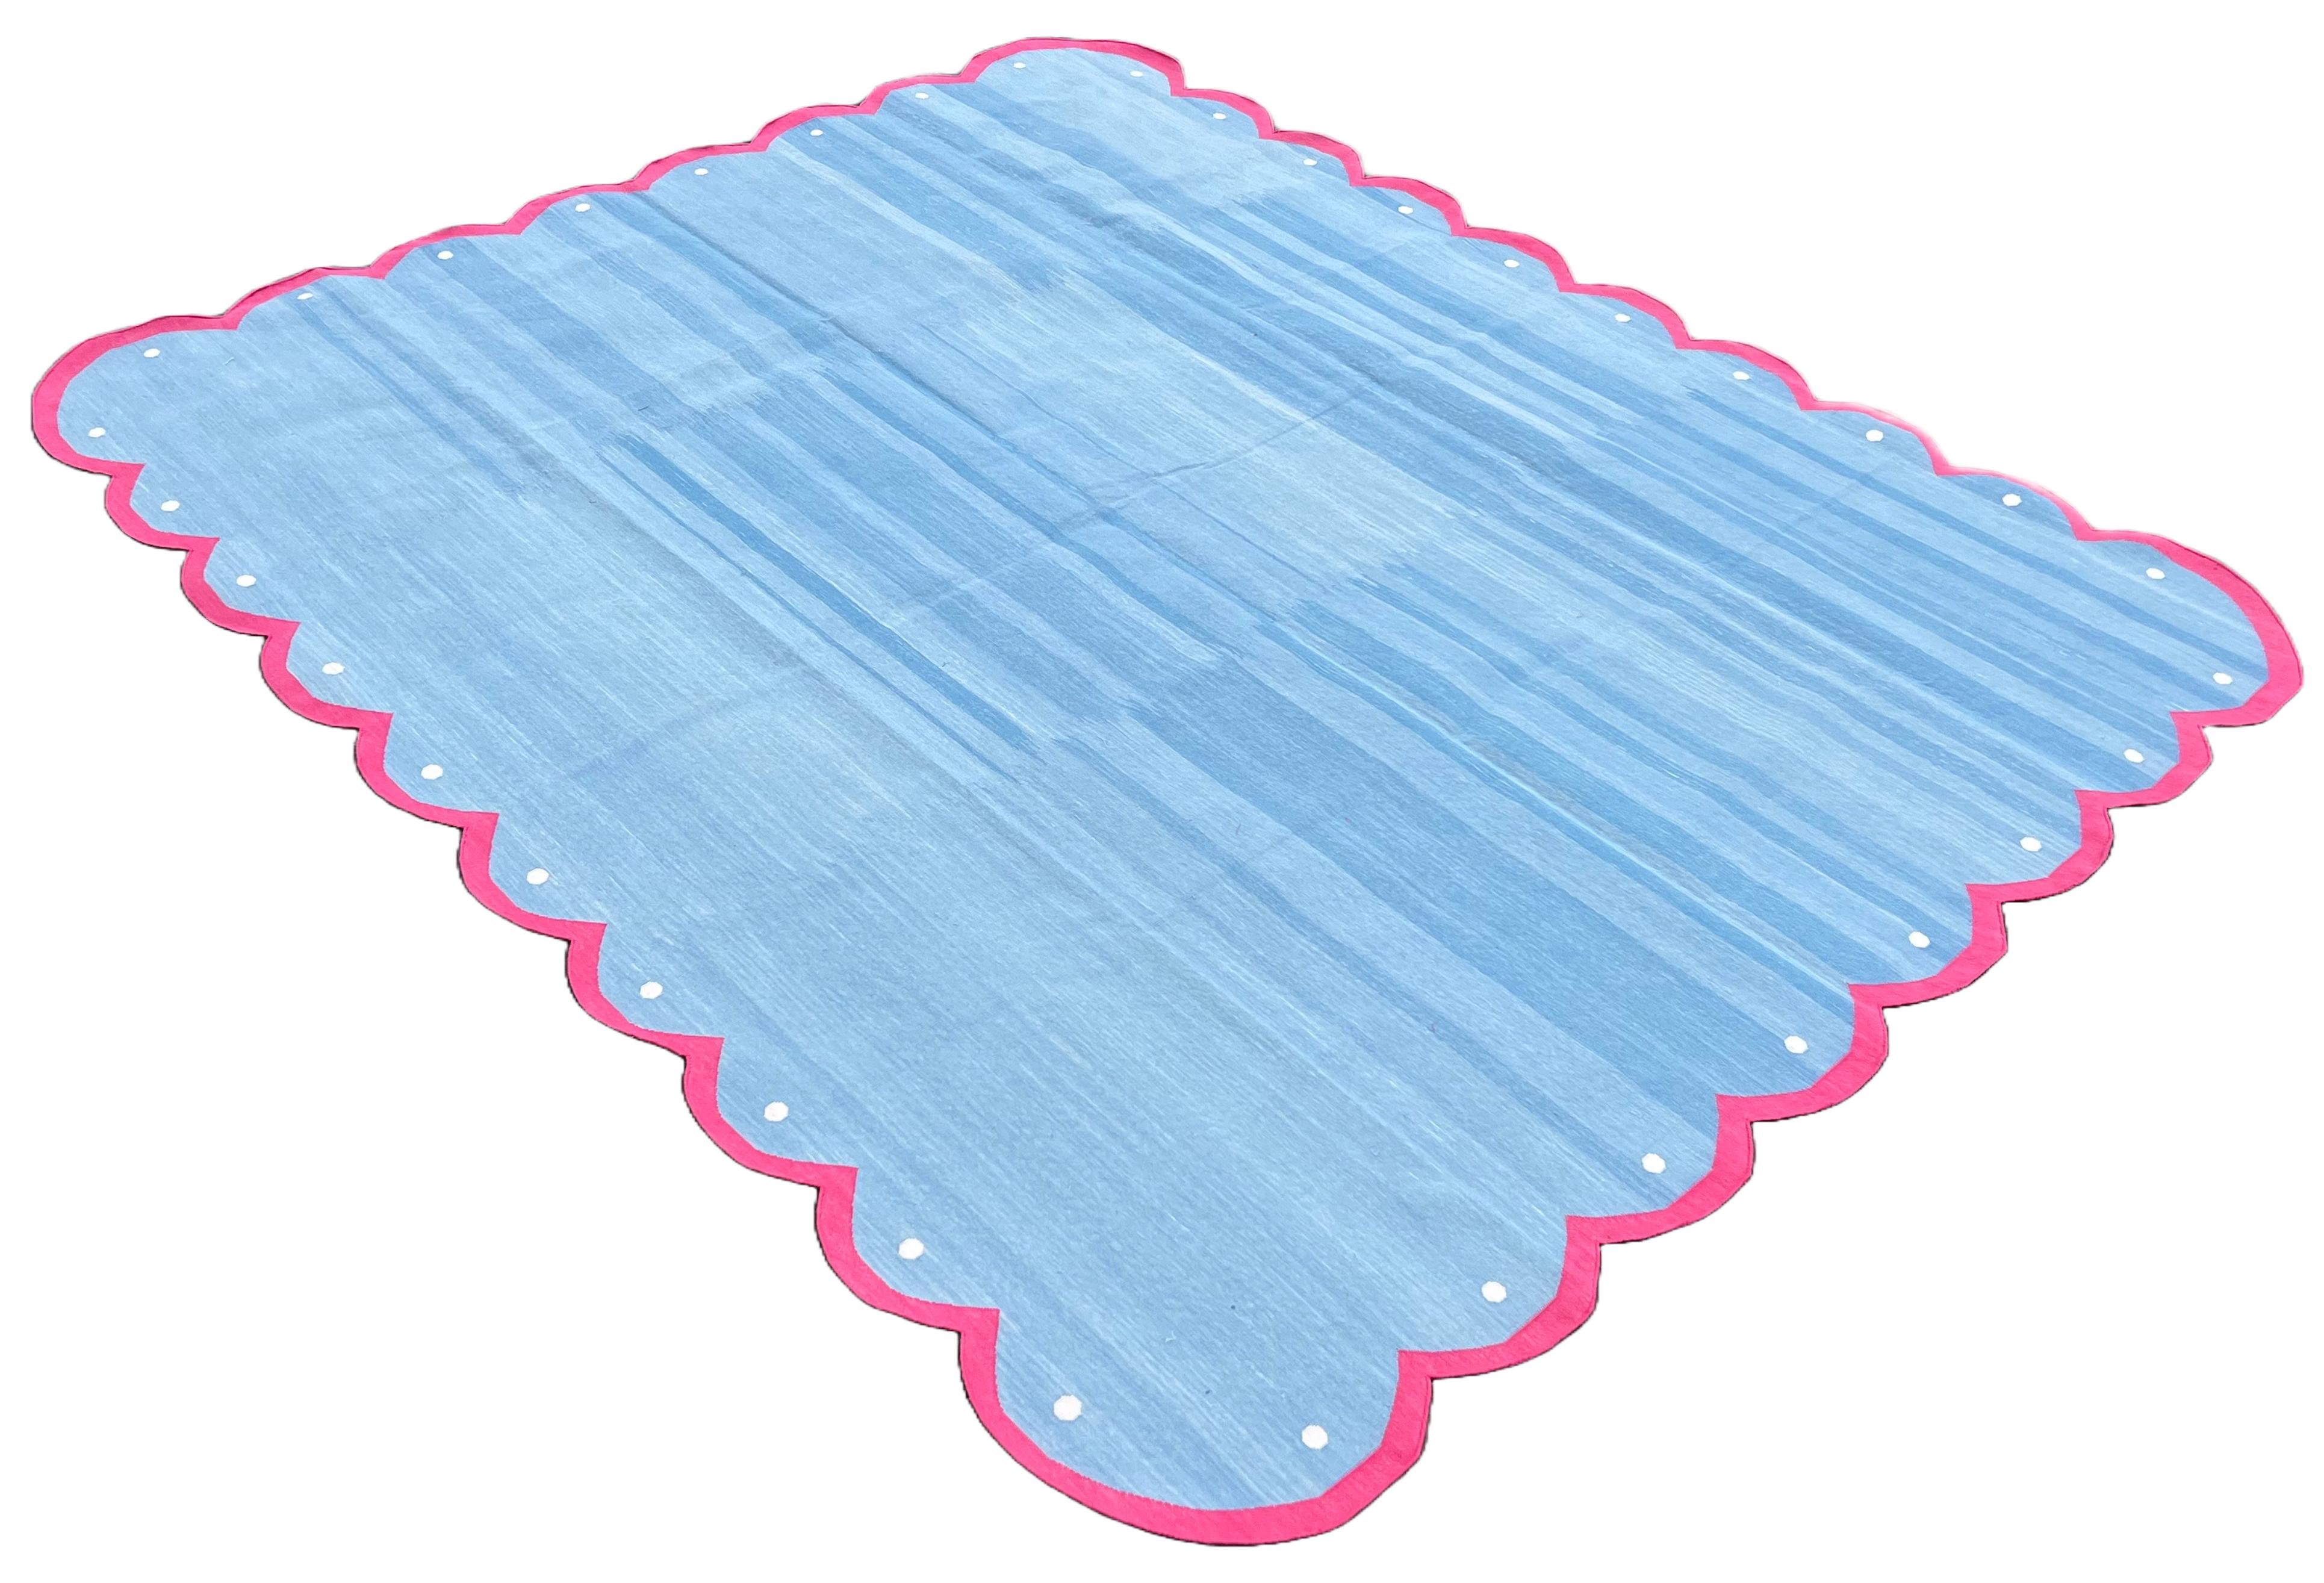 Cotton Vegetable Dyed Sky Blue, Cream And Pink Four Sided Scalloped Rug-8'x10' 
(Scallops runs all four Sides)
These special flat-weave dhurries are hand-woven with 15 ply 100% cotton yarn. Due to the special manufacturing techniques used to create